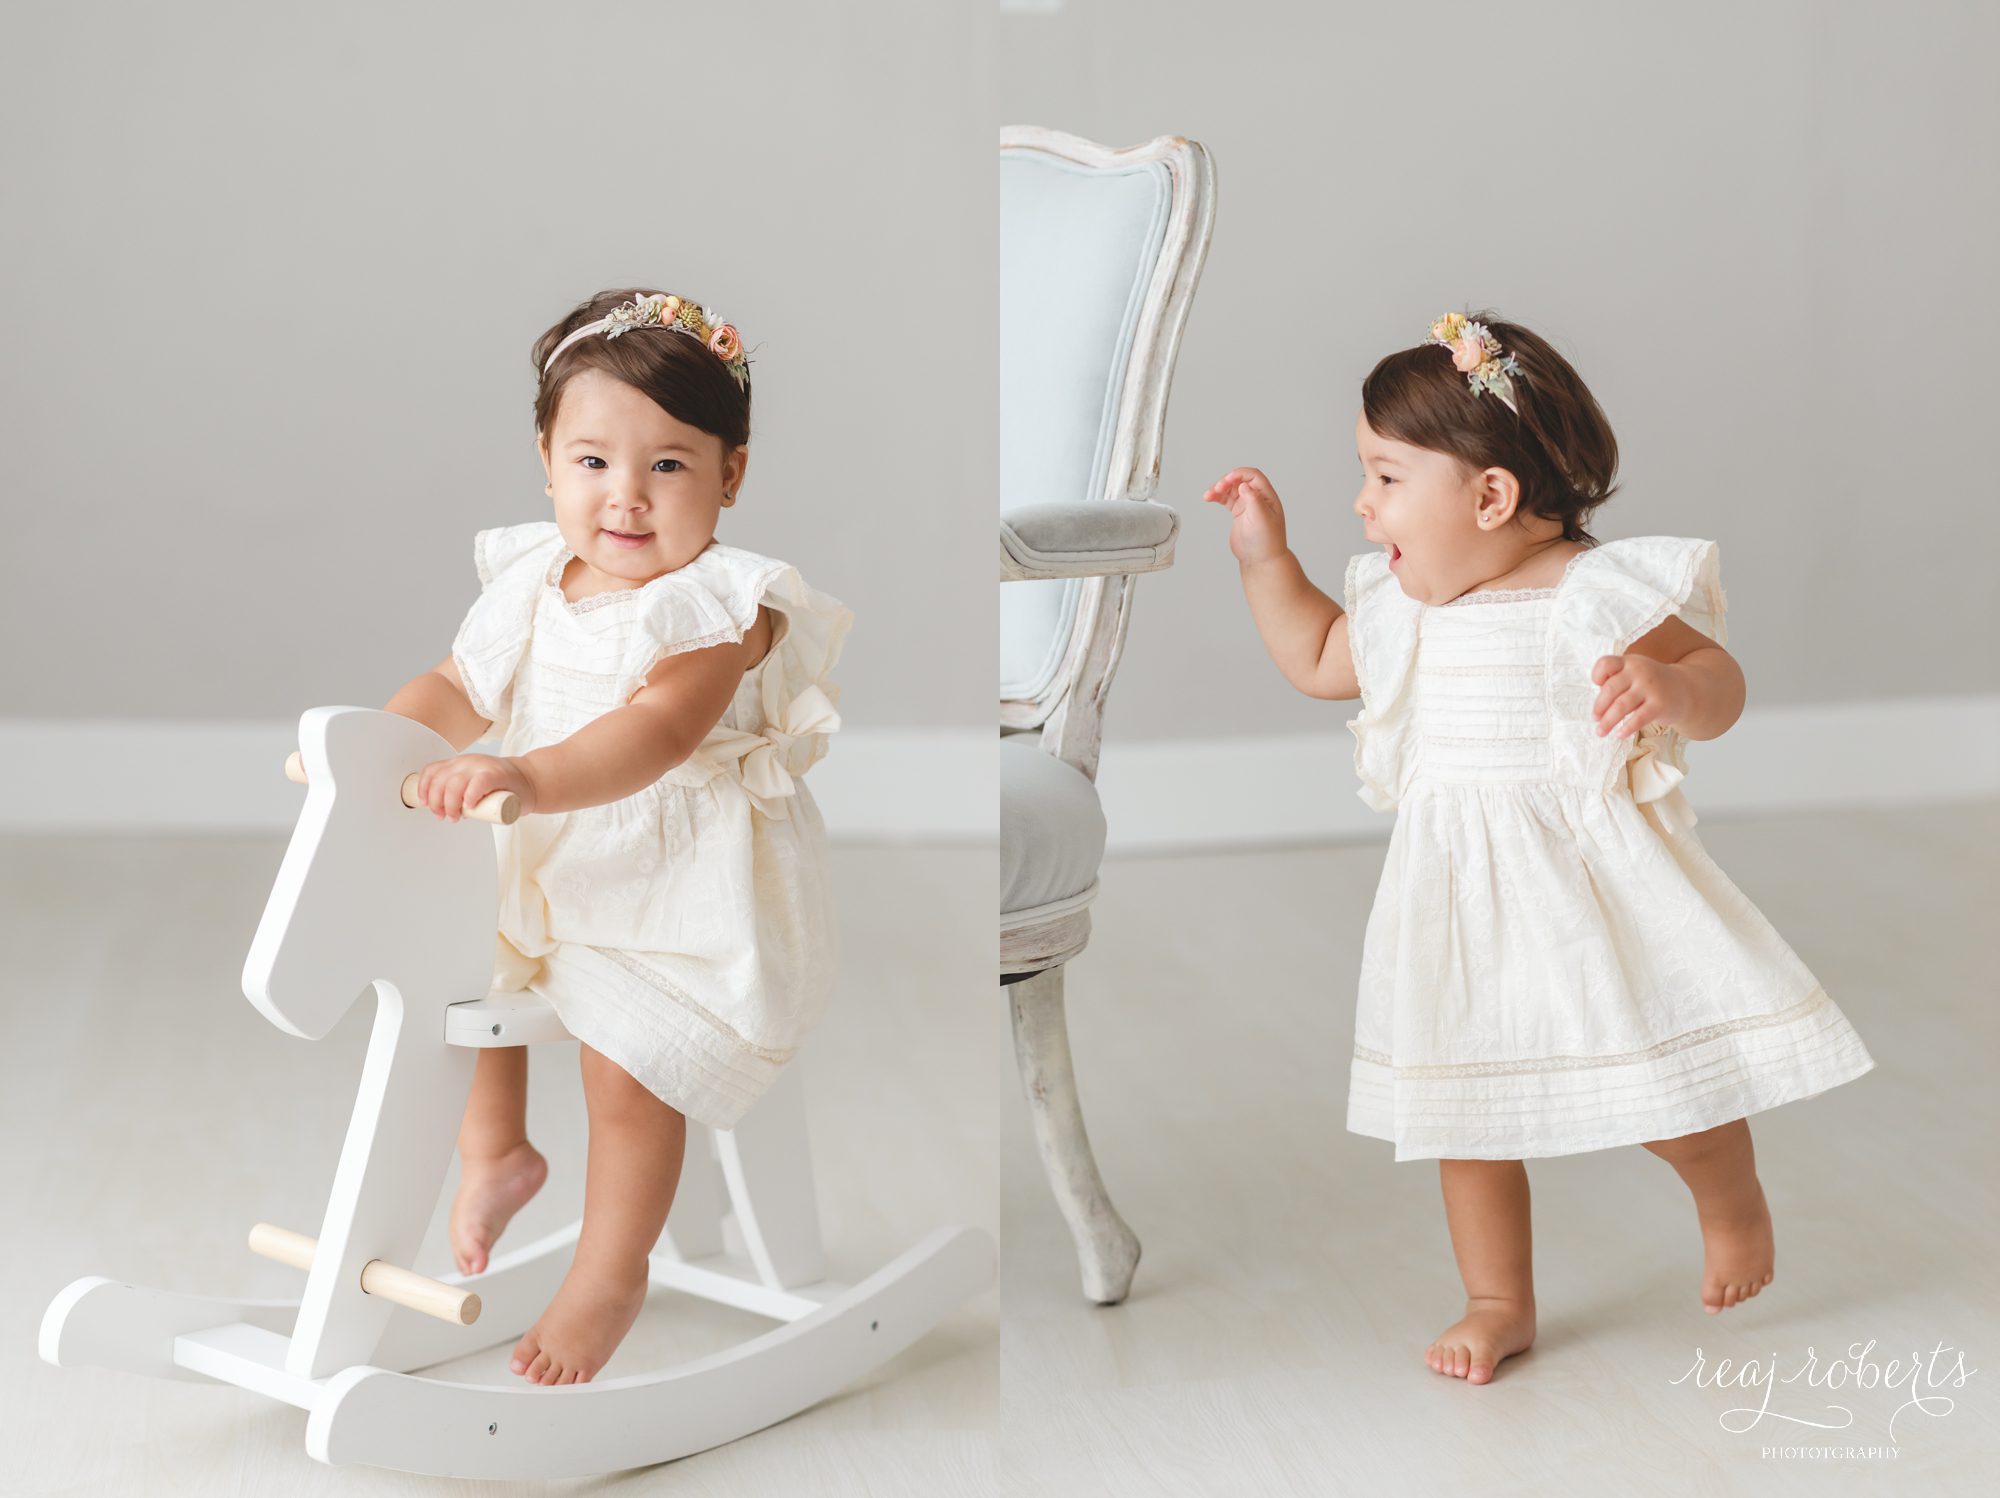 baby girl in white dress on rocking horse playing first birthday photos by Reaj Roberts Photography